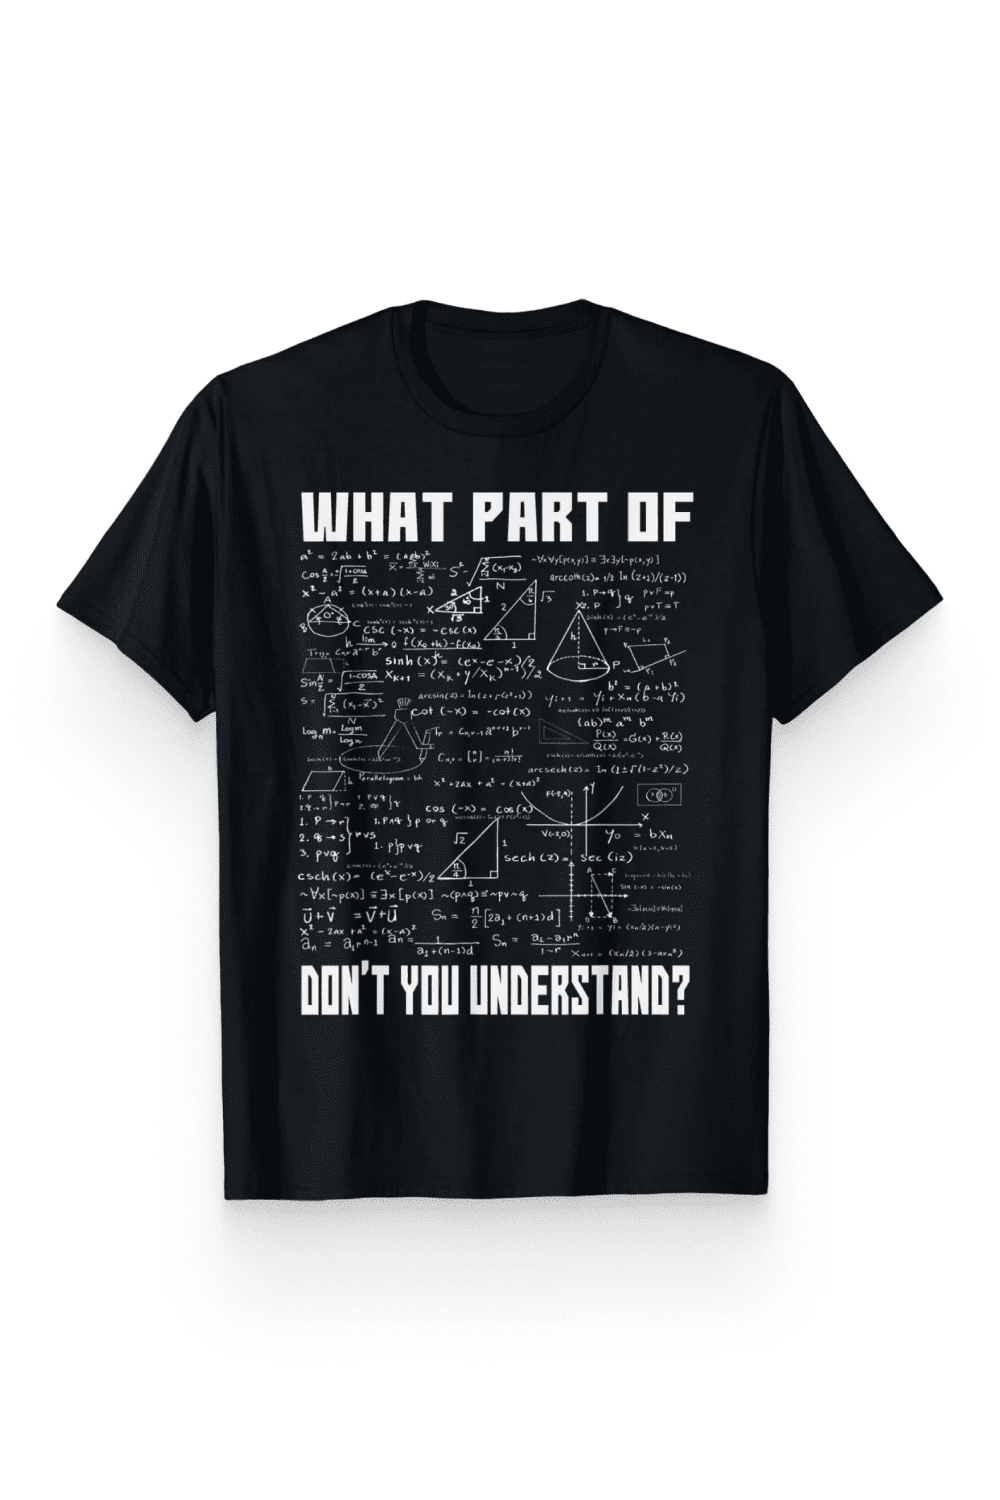 Black T-Shirt with white formulas and funny text.